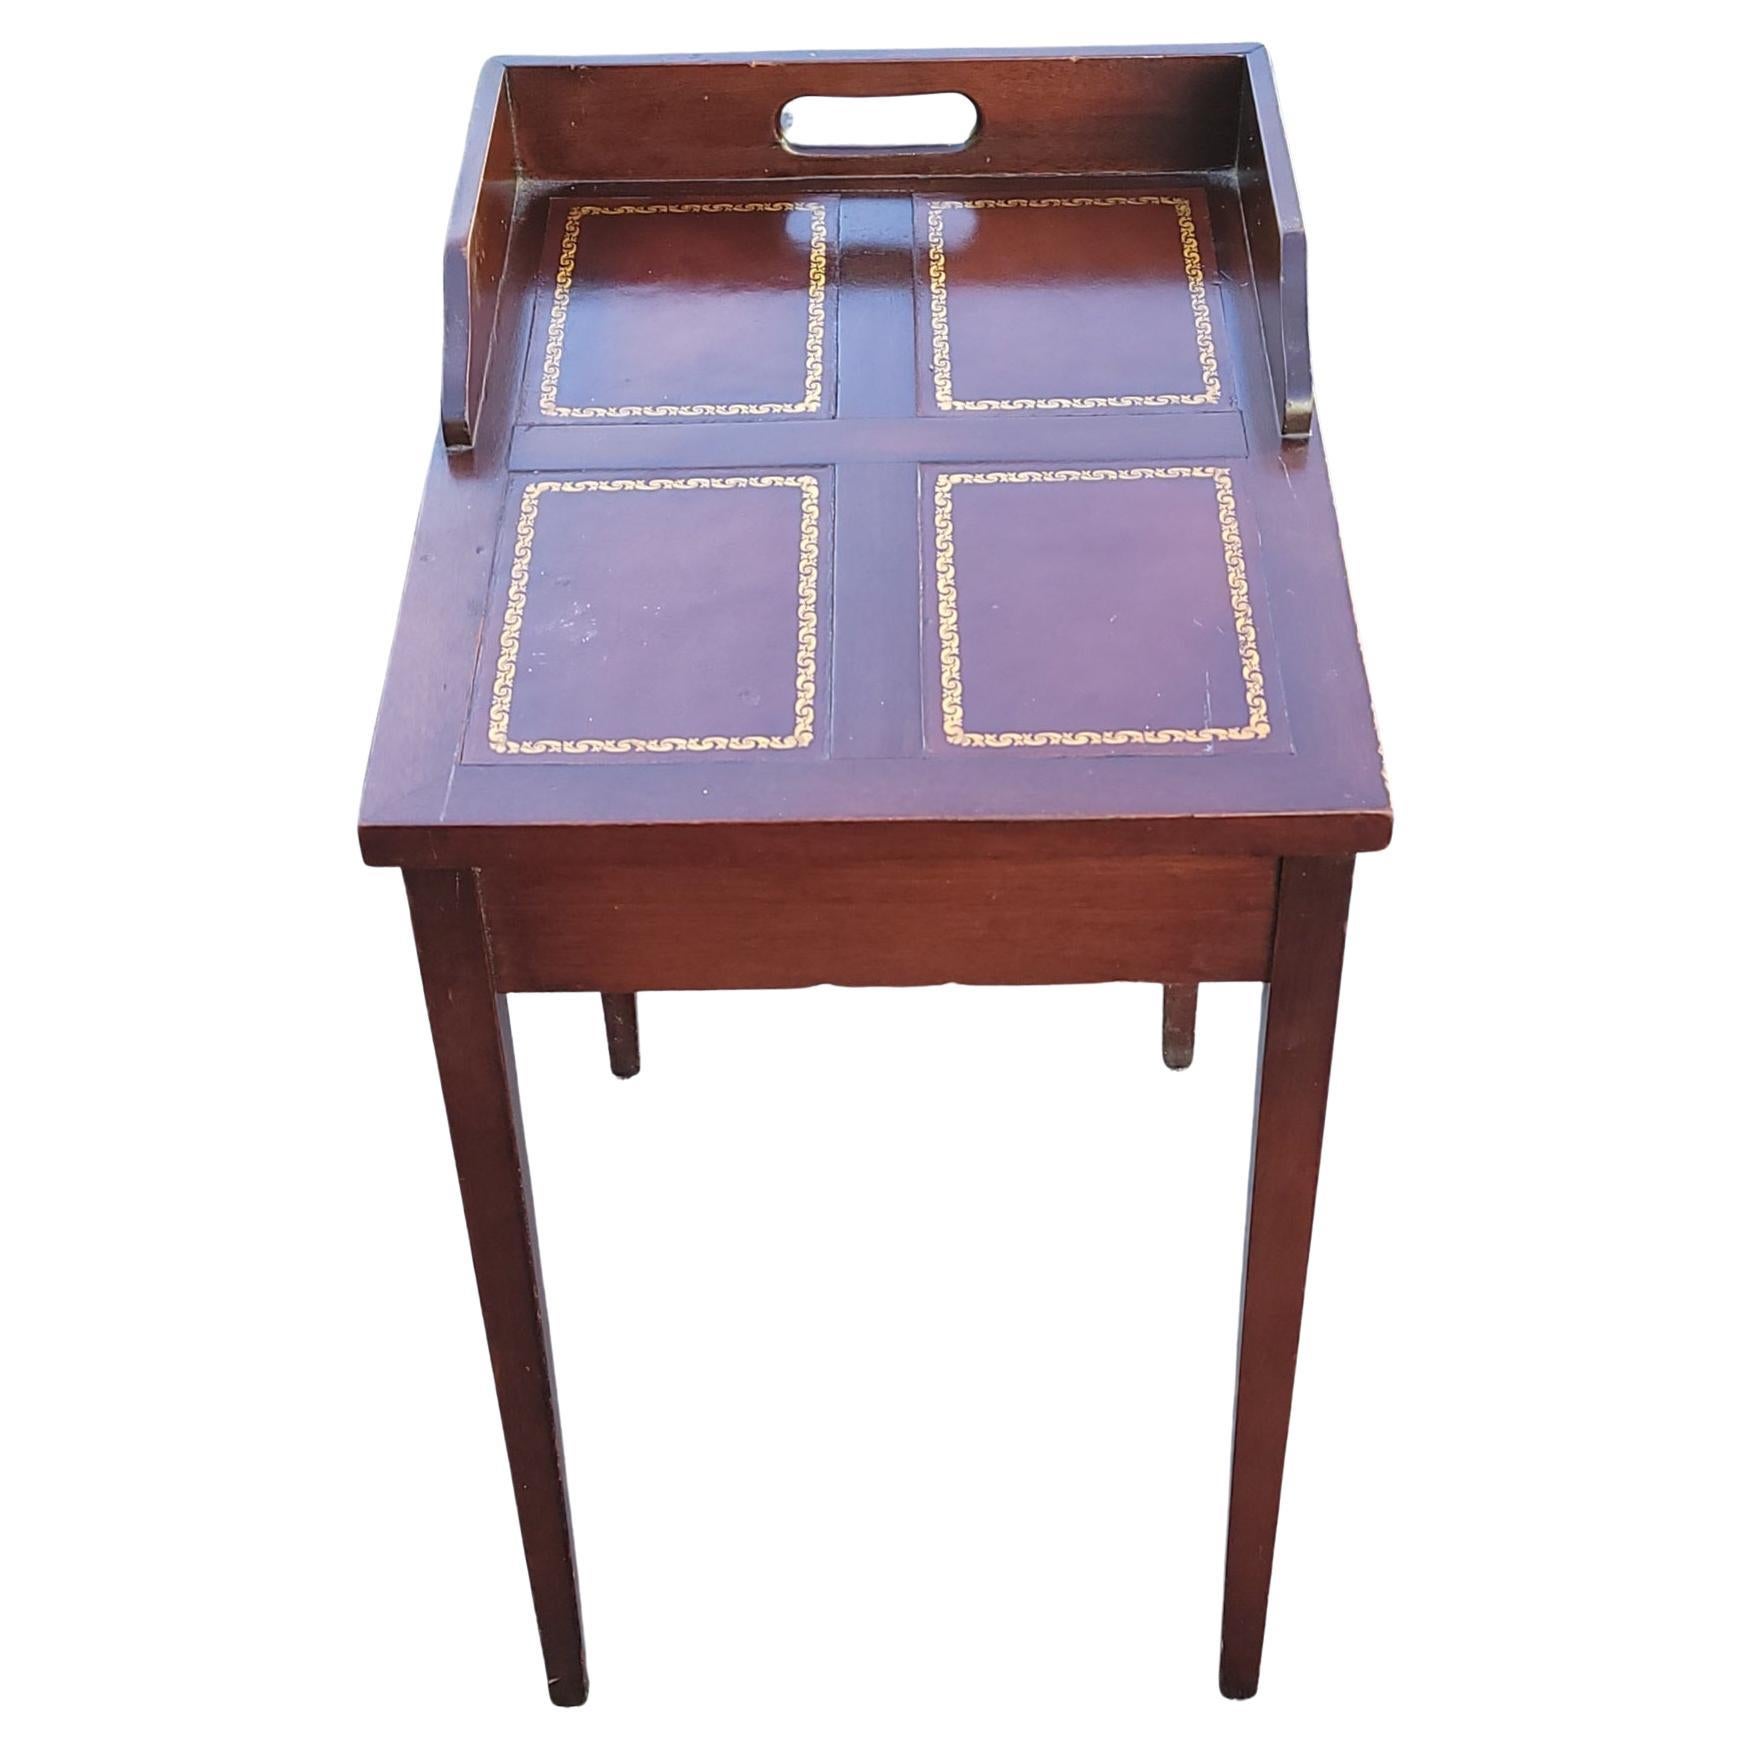 American Mid-Century Mahogany Stinciled Leather Top Candle Stand Side Table For Sale